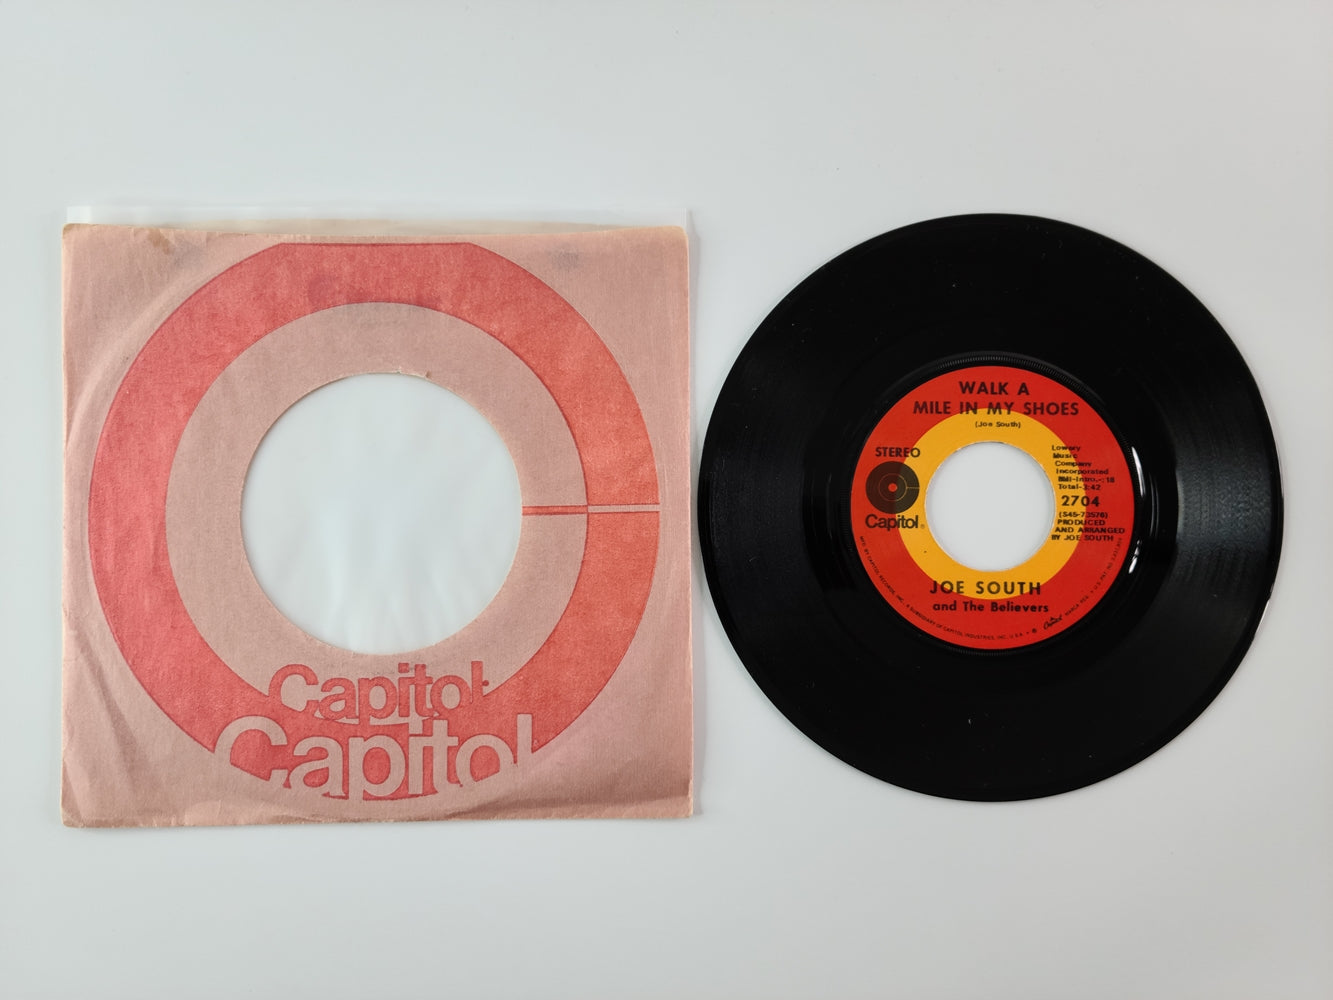 Joe South and the Believers - Walk a Mile in My Shoes / Shelter (1969, 7'' Single)